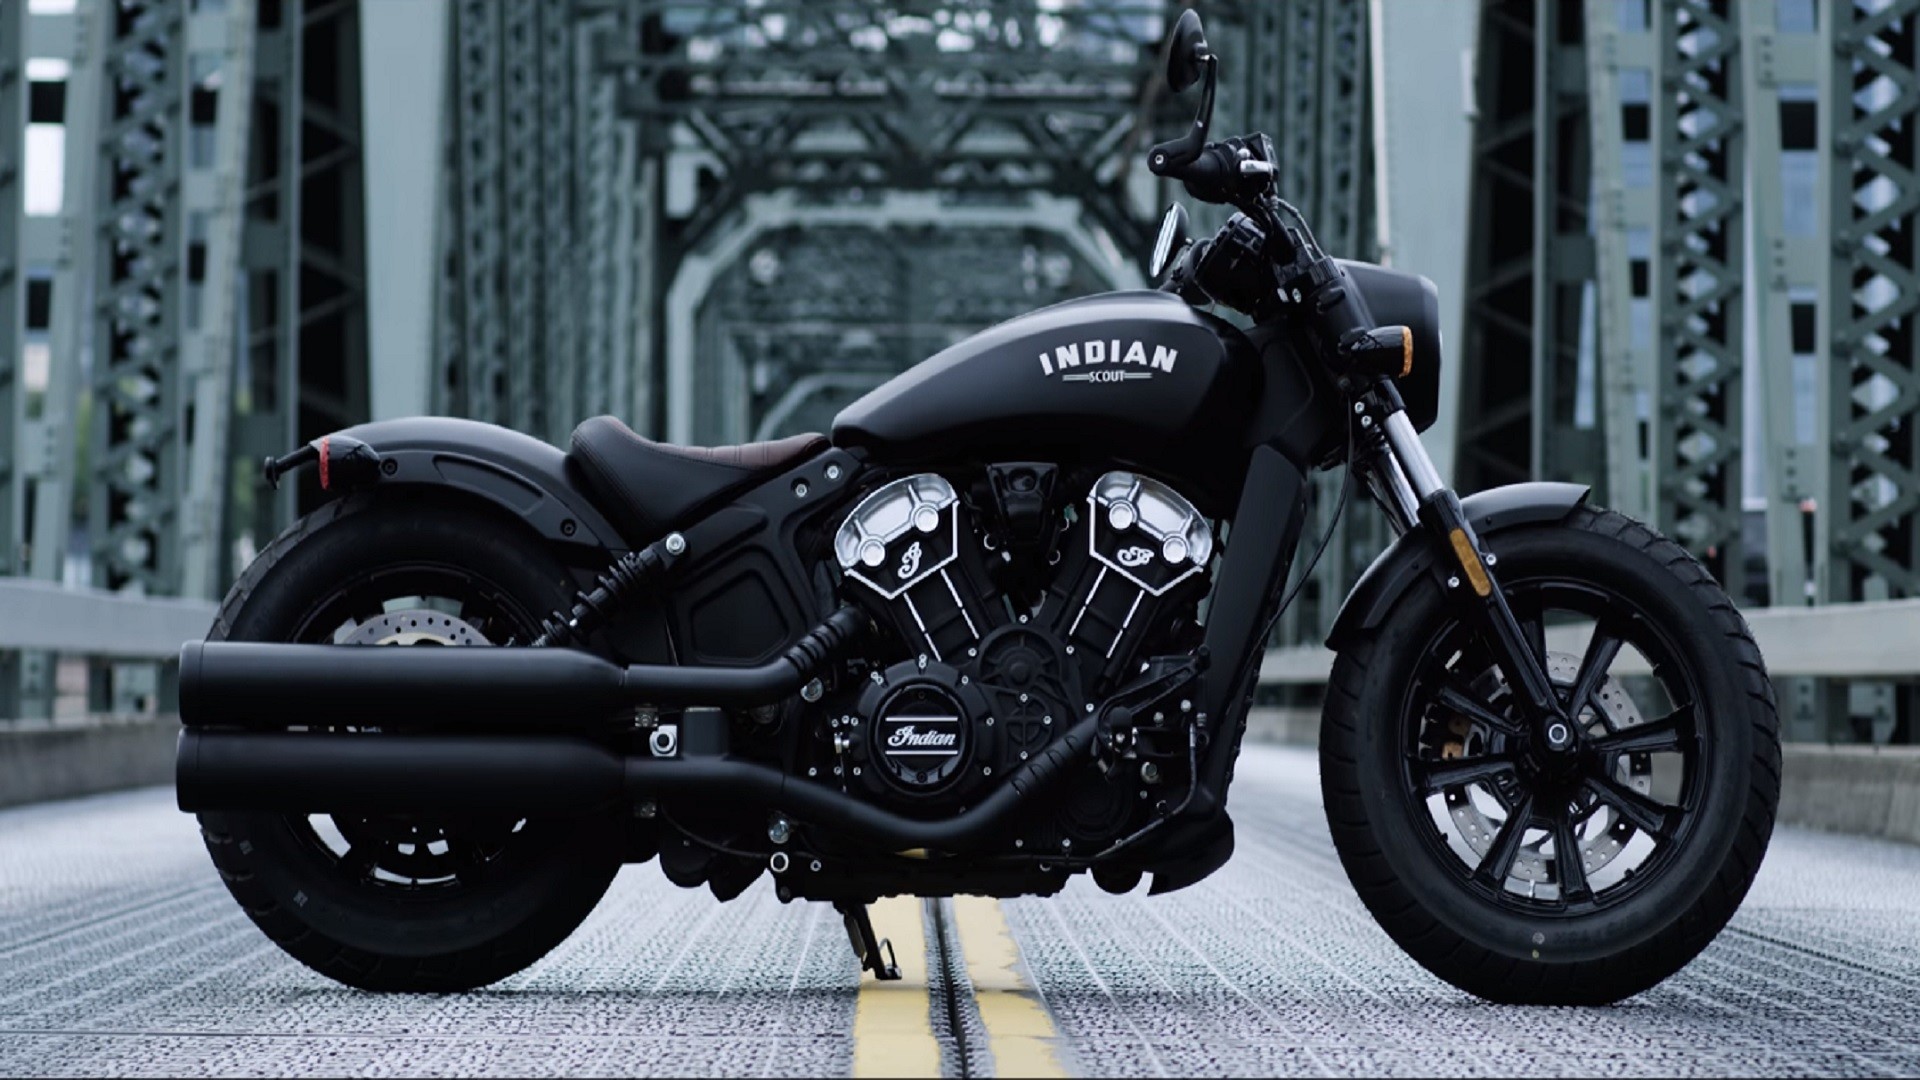 1920x1080 Indian Scout Bobber Motorcycle is Slammed Style in a Sleek Design -  SolidSmack -